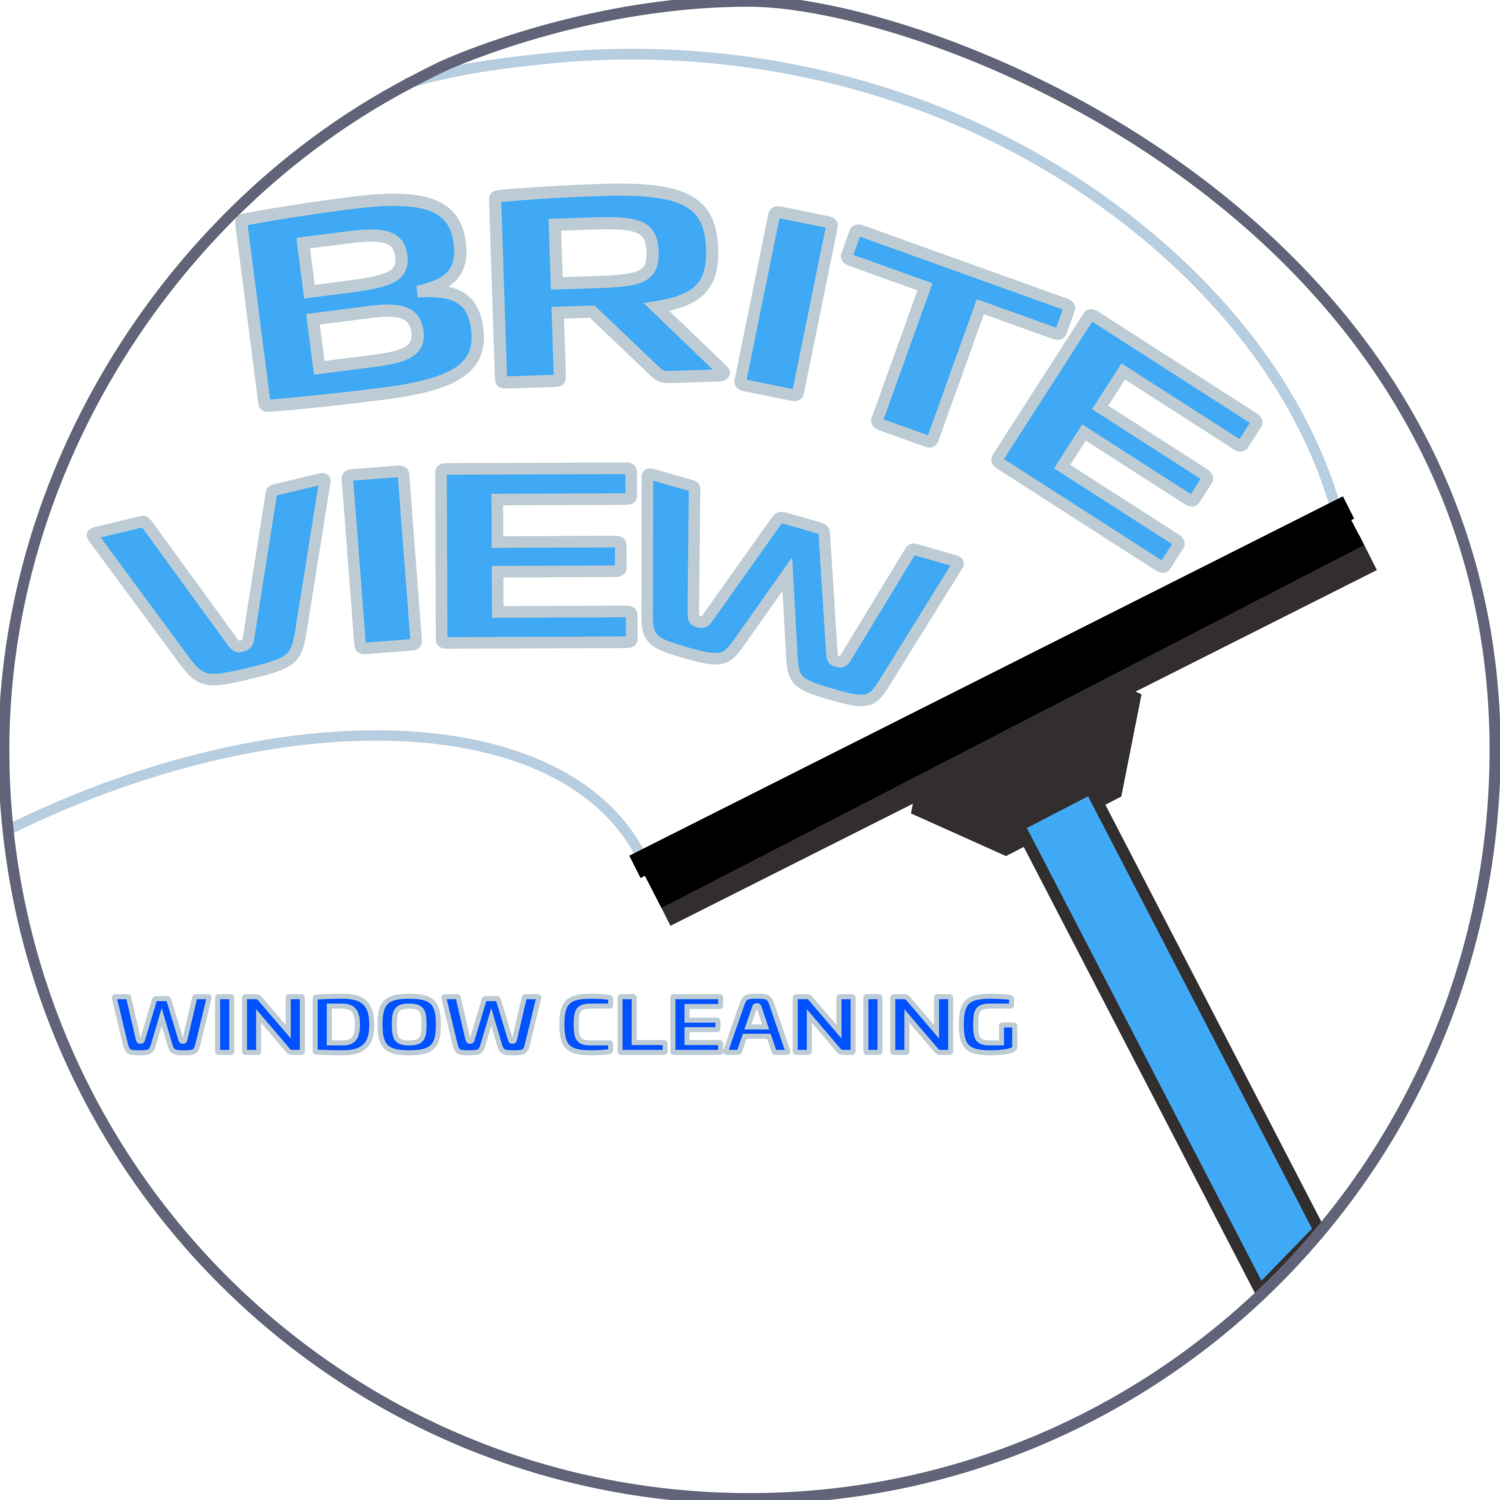 Clean clipart window washer. Briteview cleaning 